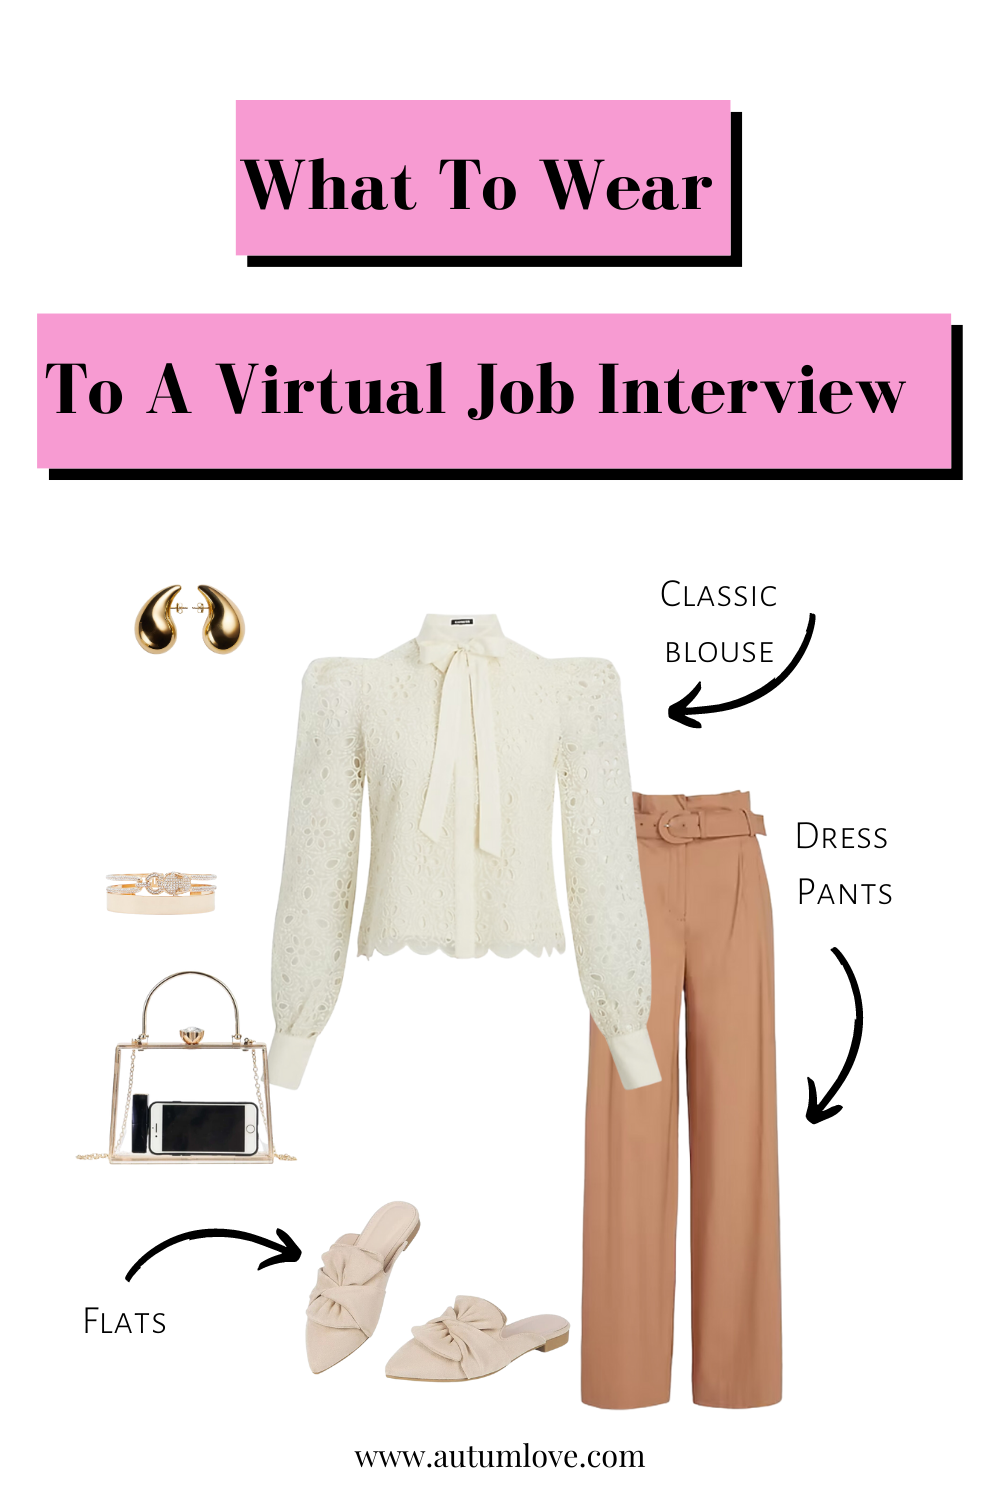 What To Wear to a Job Interview: Dress for Success